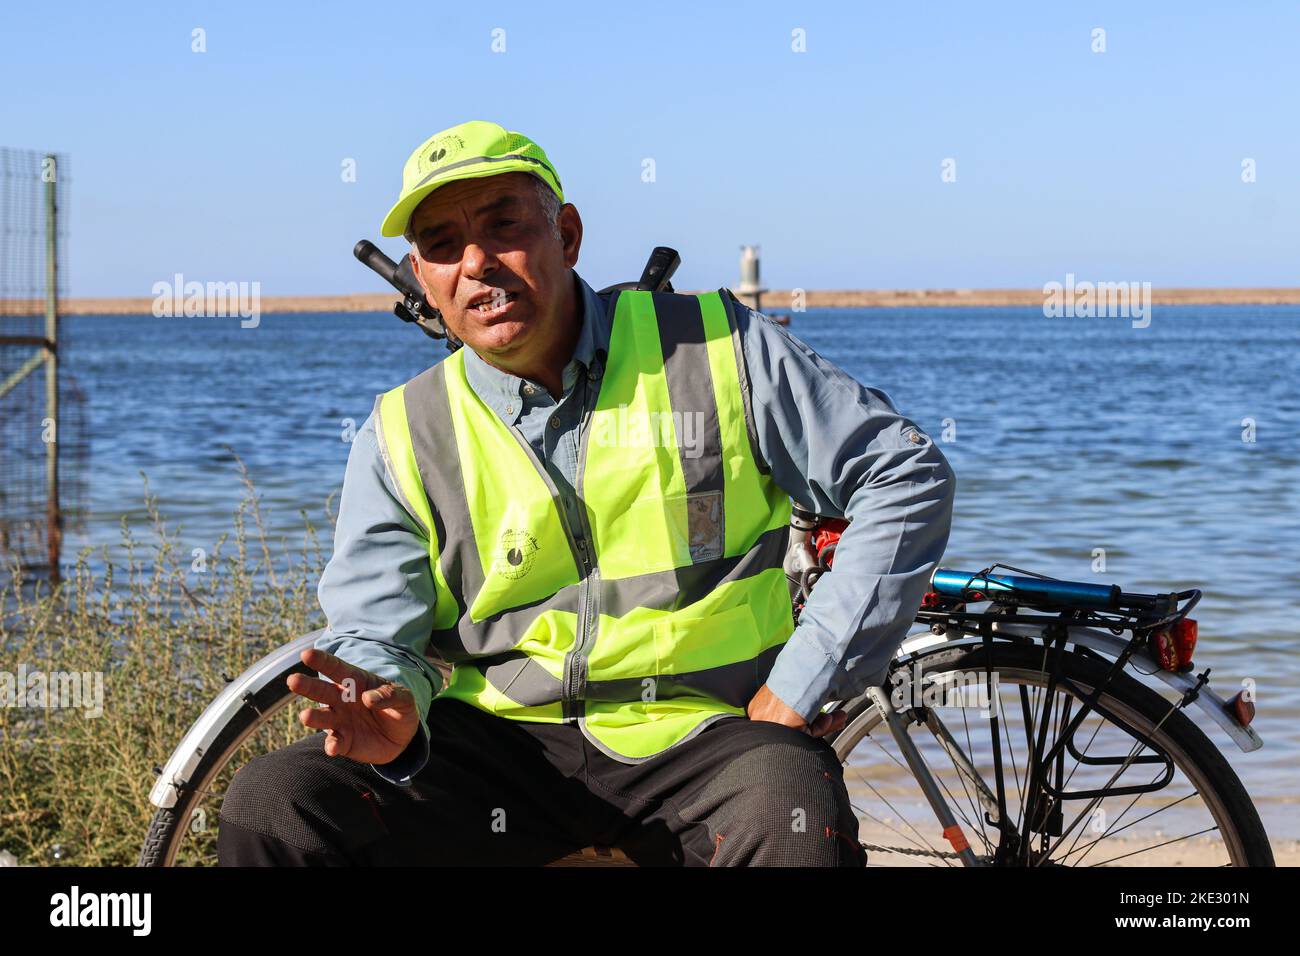 An environmental activist seen during a press interview about his voluntary campaign to clean beaches. Libyan Ali Ragaibi, 52, launched an initiative aimed at cleaning up the waste and garbage scattered on the beaches of Libya to maintain the cleanliness of the country's beaches and in the hope of putting an end to pollution. For 13 years, he has been cleaning up the beach, which he calls the Sea and Sun Campaign, at the end of each summer. The campaign has attracted a large number of followers over the years, and many people are coming to the beach from across the country to do their part, an Stock Photo